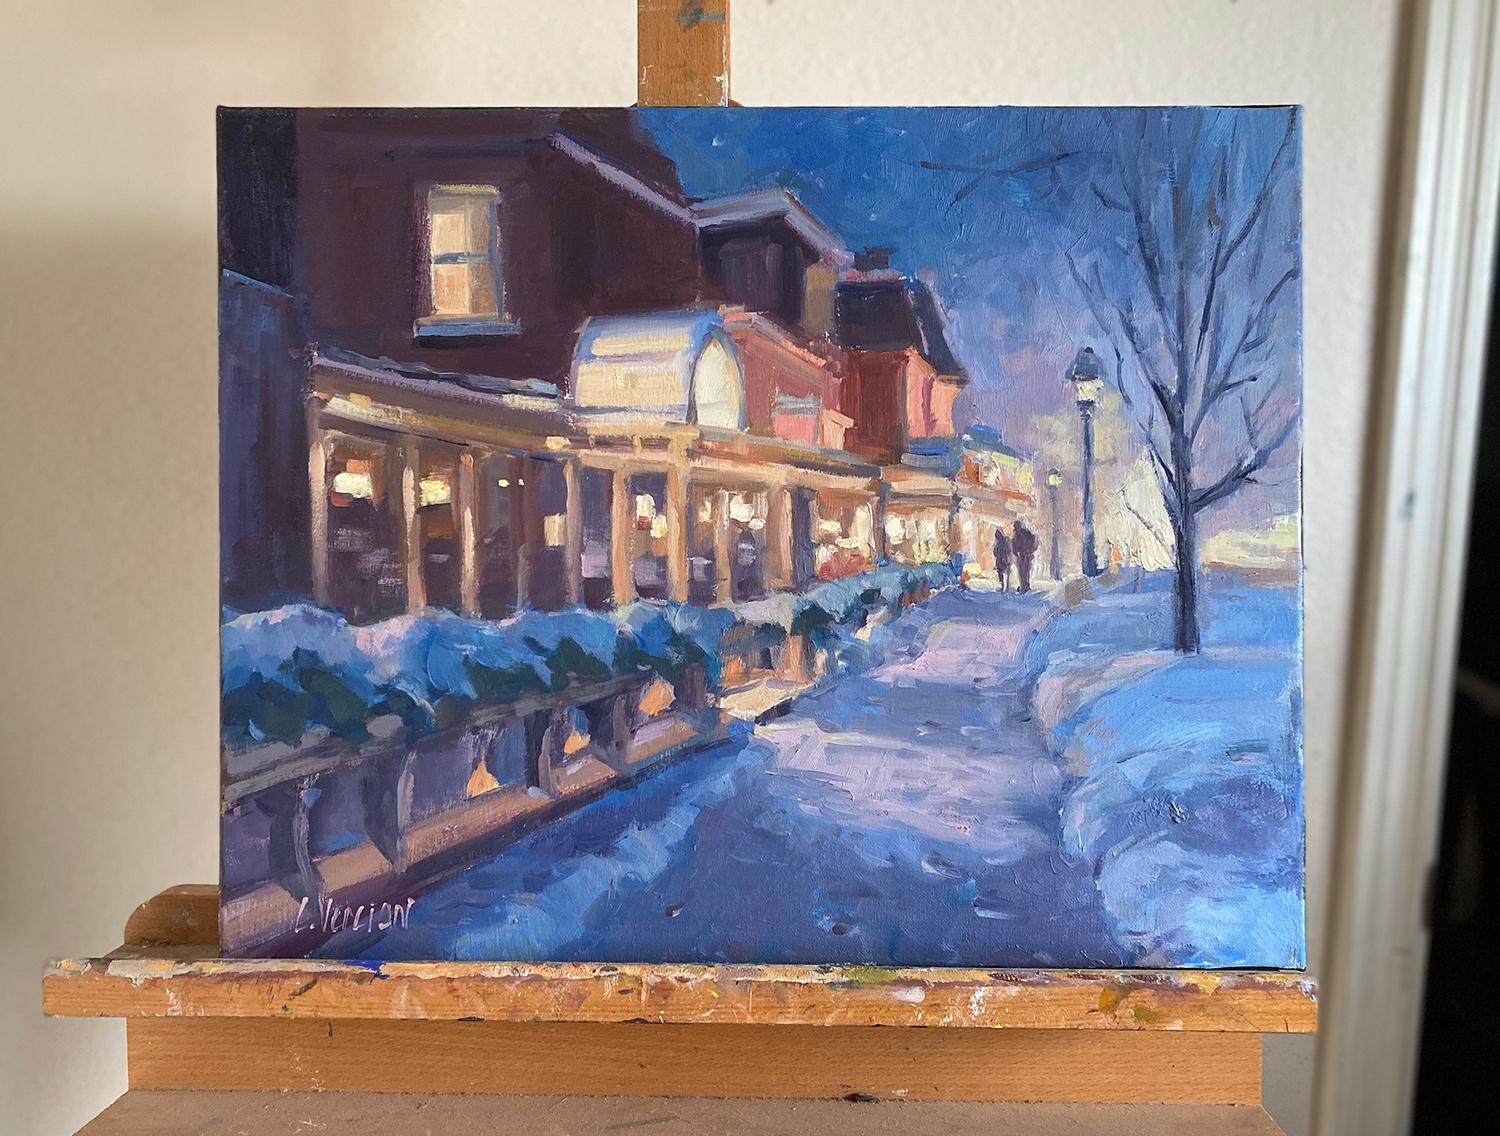 <p>Artist Comments<br>A glowing depiction of a cold winter evening by artist Claudia Verciani. Figures stroll down a snow-covered sidewalk illuminated by inviting restaurant lights. 